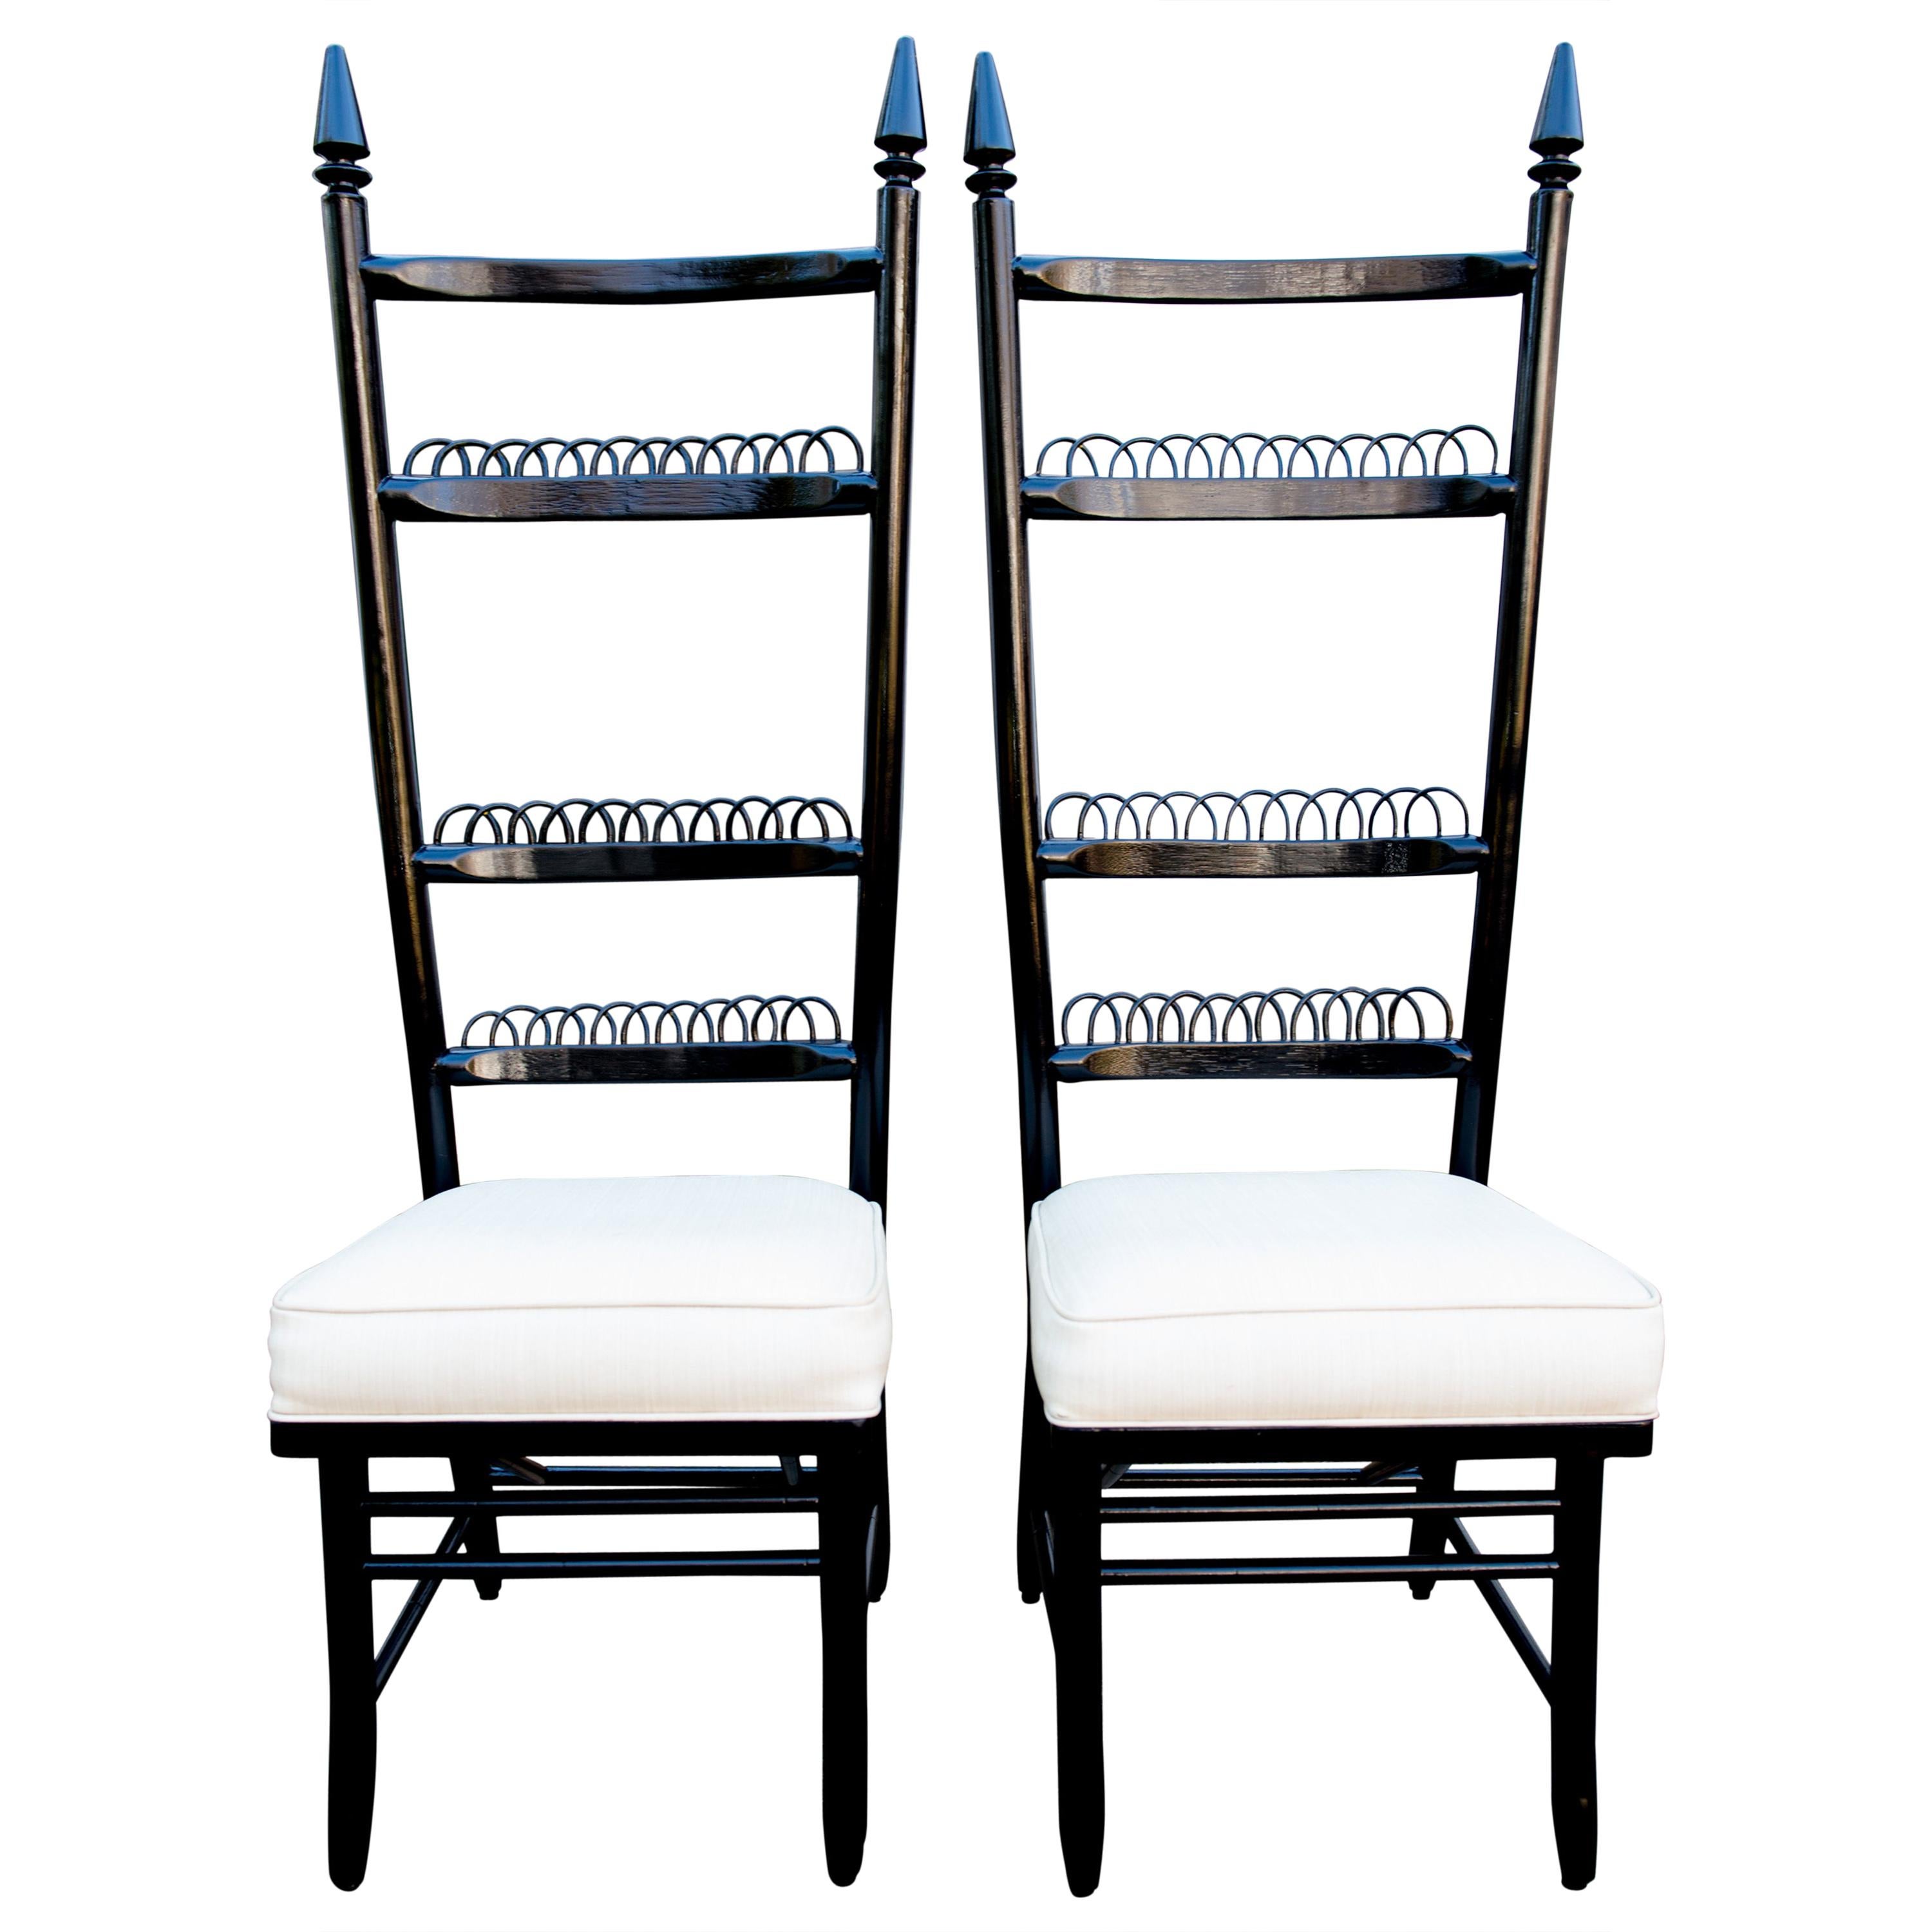 Pair of High Ladder Back Chairs